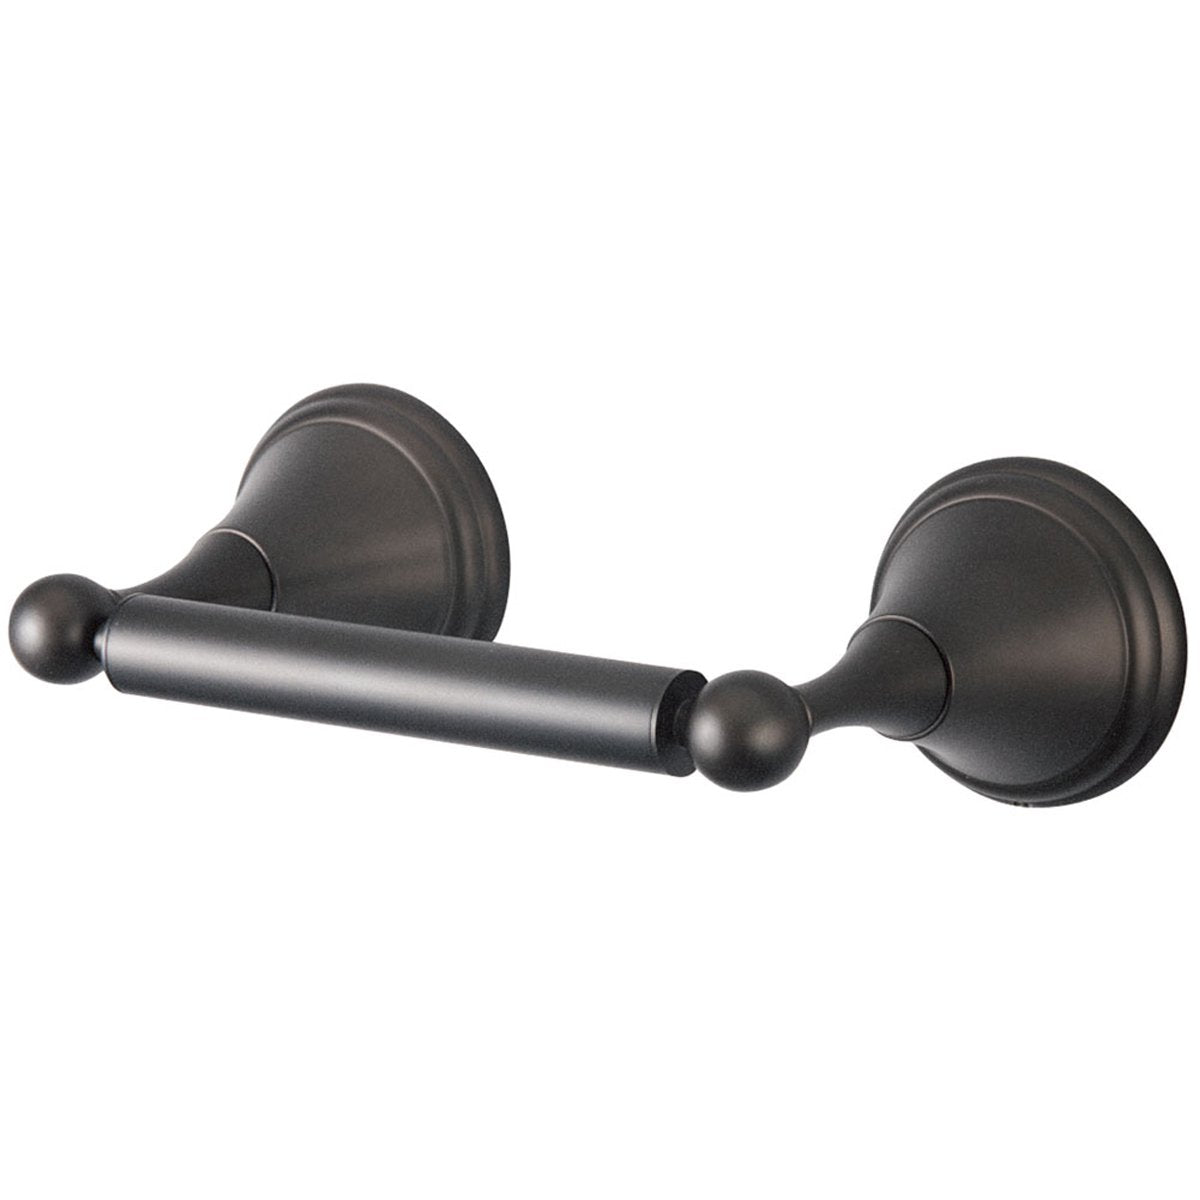 Kingston Brass Governor Toilet Paper Holder-Bathroom Accessories-Free Shipping-Directsinks.